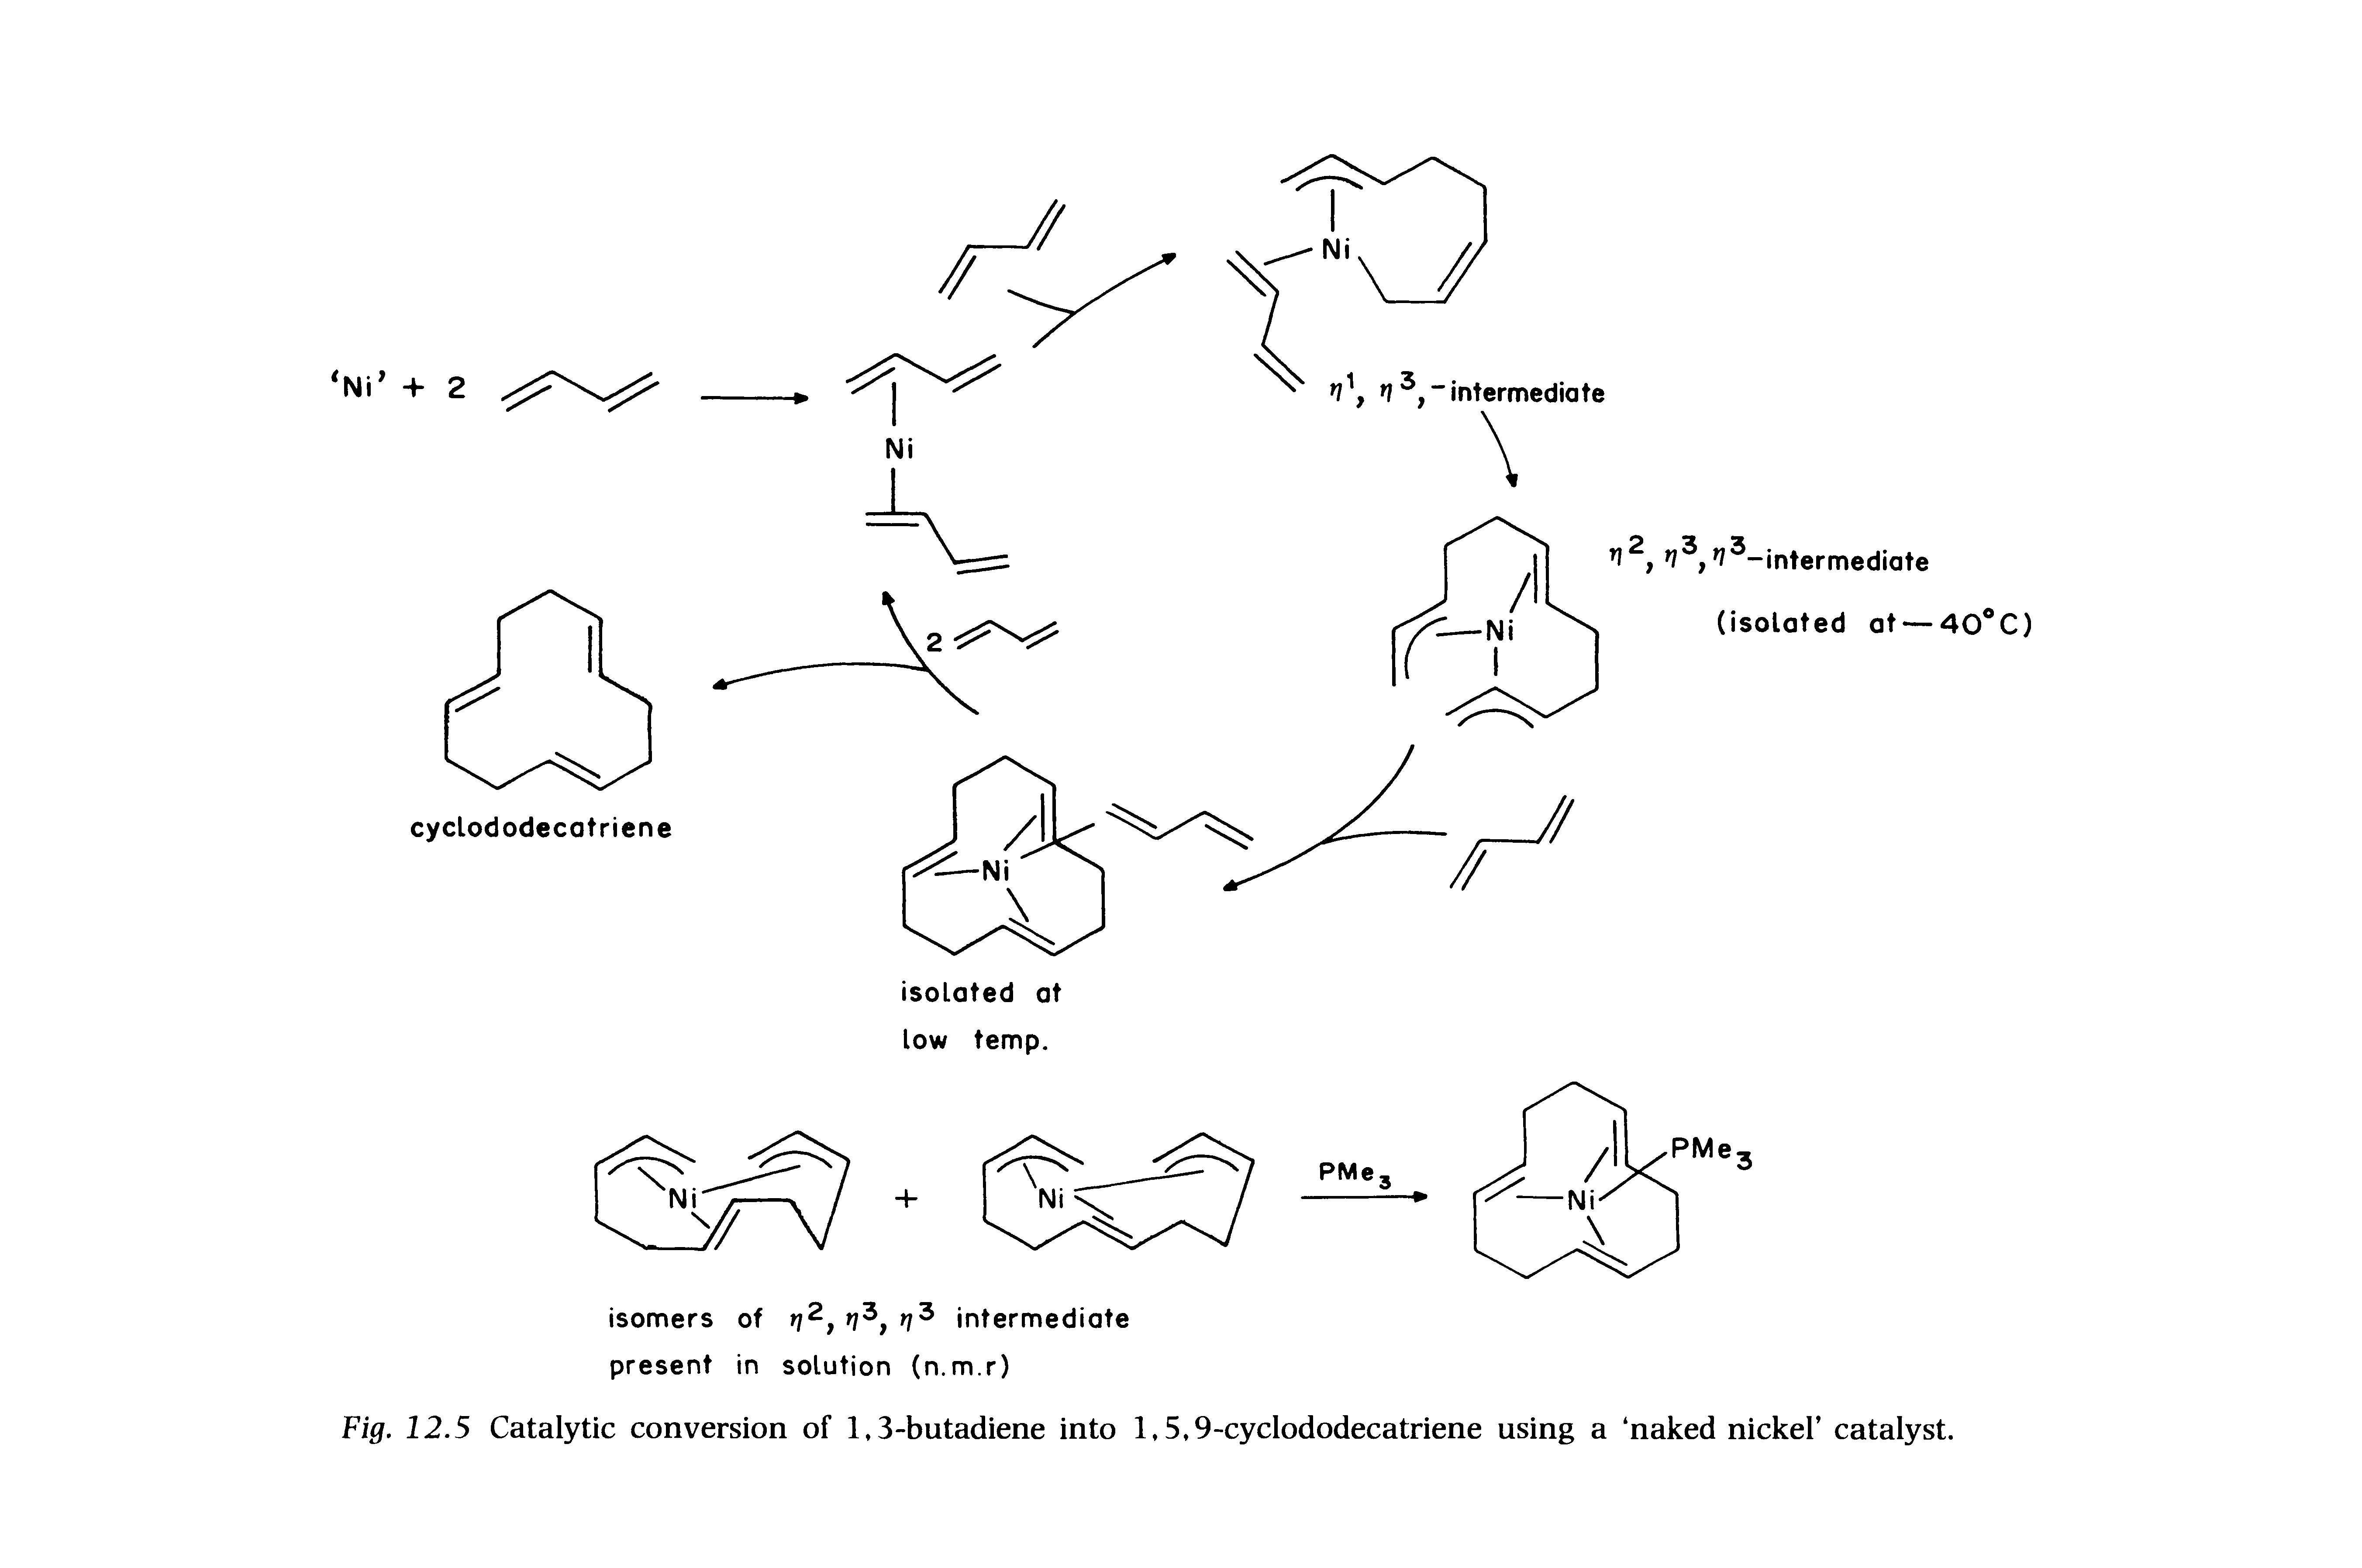 Fig. 12.5 Catalytic conversion of 1,3-butadiene into 1,5,9-cyclododecatriene using a naked nickel catalyst.